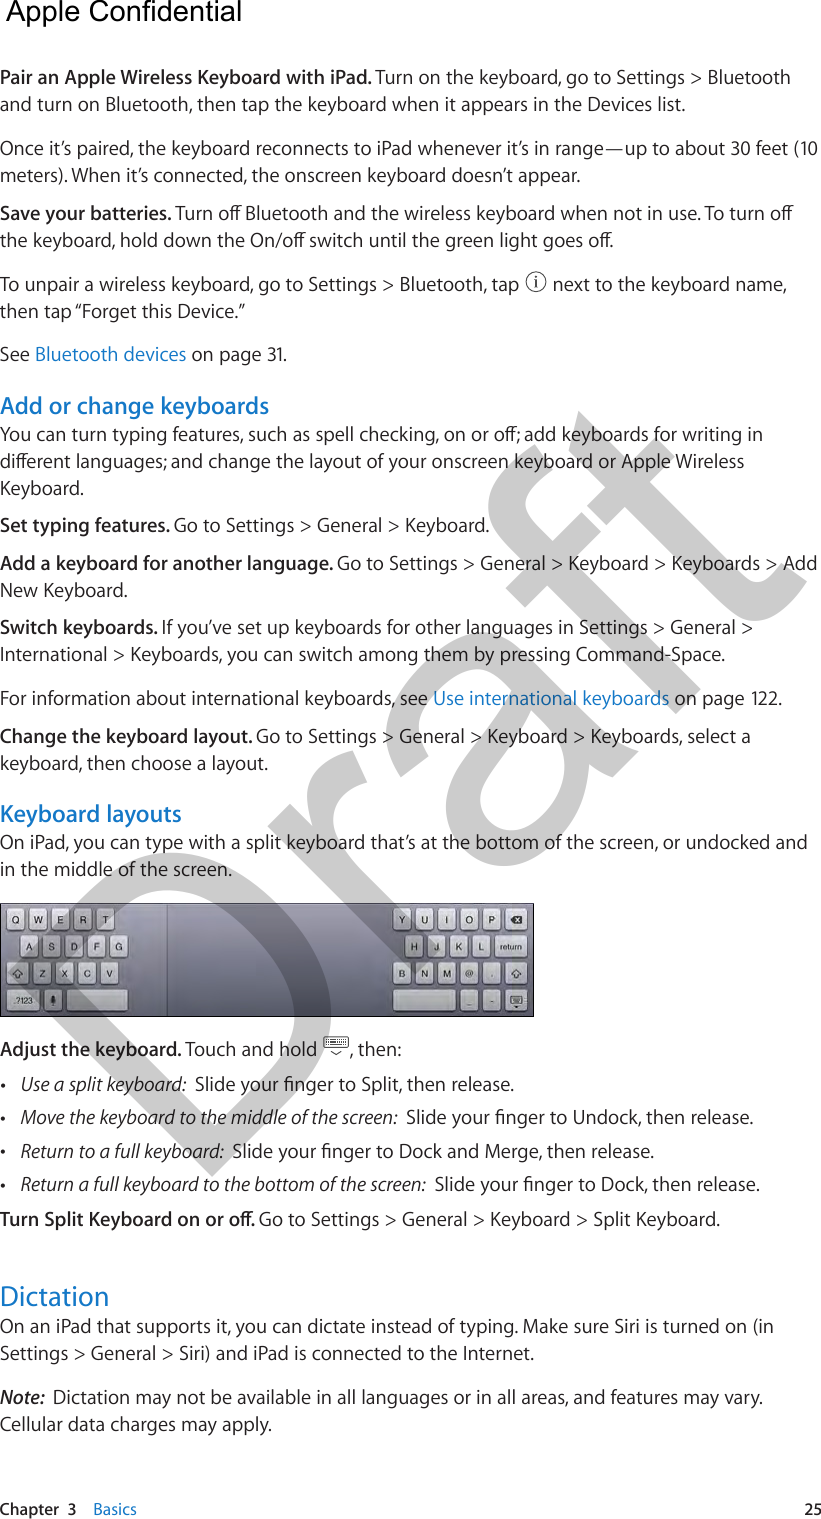 Chapter  3    Basics  25Pair an Apple Wireless Keyboard with iPad. Turn on the keyboard, go to Settings &gt; Bluetooth and turn on Bluetooth, then tap the keyboard when it appears in the Devices list.Once it’s paired, the keyboard reconnects to iPad whenever it’s in range—up to about 30 feet (10 meters). When it’s connected, the onscreen keyboard doesn’t appear.Save your batteries. Turn o Bluetooth and the wireless keyboard when not in use. To turn o the keyboard, hold down the On/o switch until the green light goes o.To unpair a wireless keyboard, go to Settings &gt; Bluetooth, tap   next to the keyboard name, then tap “Forget this Device.”See Bluetooth devices on page 31.Add or change keyboardsYou can turn typing features, such as spell checking, on or o; add keyboards for writing in dierent languages; and change the layout of your onscreen keyboard or Apple Wireless Keyboard. Set typing features. Go to Settings &gt; General &gt; Keyboard. Add a keyboard for another language. Go to Settings &gt; General &gt; Keyboard &gt; Keyboards &gt; Add New Keyboard.Switch keyboards. If you’ve set up keyboards for other languages in Settings &gt; General &gt; International &gt; Keyboards, you can switch among them by pressing Command-Space.For information about international keyboards, see Use international keyboards on page 122.Change the keyboard layout. Go to Settings &gt; General &gt; Keyboard &gt; Keyboards, select a keyboard, then choose a layout. Keyboard layoutsOn iPad, you can type with a split keyboard that’s at the bottom of the screen, or undocked and in the middle of the screen. Adjust the keyboard. Touch and hold  , then: •Use a split keyboard:  Slide your nger to Split, then release. •Move the keyboard to the middle of the screen:  Slide your nger to Undock, then release. •Return to a full keyboard:  Slide your nger to Dock and Merge, then release. •Return a full keyboard to the bottom of the screen:  Slide your nger to Dock, then release.Turn Split Keyboard on or o. Go to Settings &gt; General &gt; Keyboard &gt; Split Keyboard.DictationOn an iPad that supports it, you can dictate instead of typing. Make sure Siri is turned on (in Settings &gt; General &gt; Siri) and iPad is connected to the Internet.Note:  Dictation may not be available in all languages or in all areas, and features may vary. Cellular data charges may apply.  Apple Confidential Draft